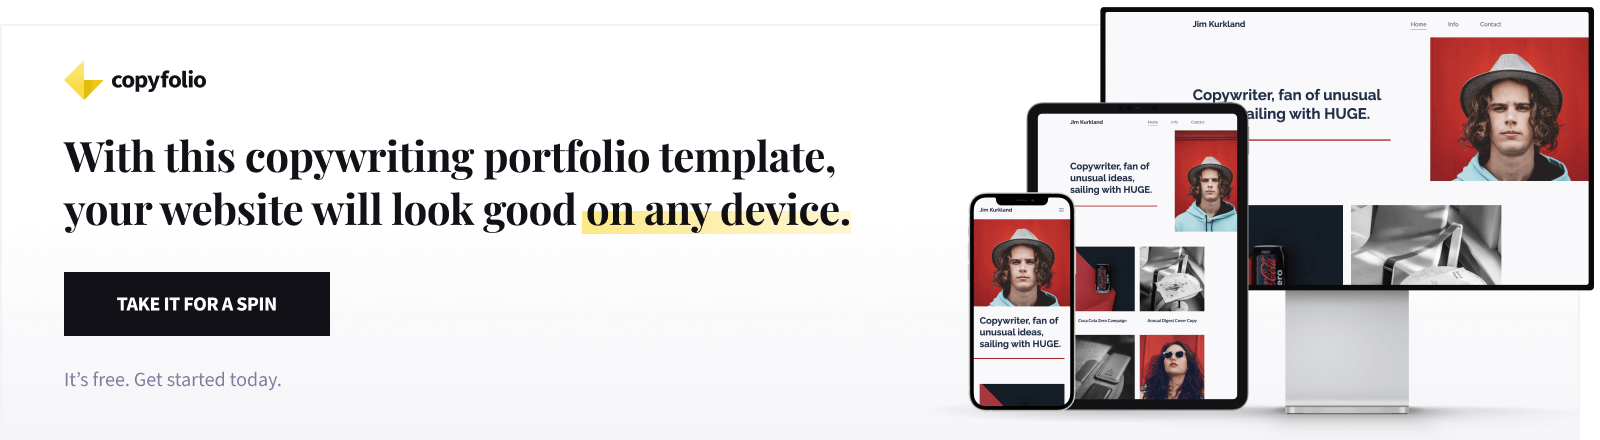 With this copywriting portfolio template, your website will look good on any device.